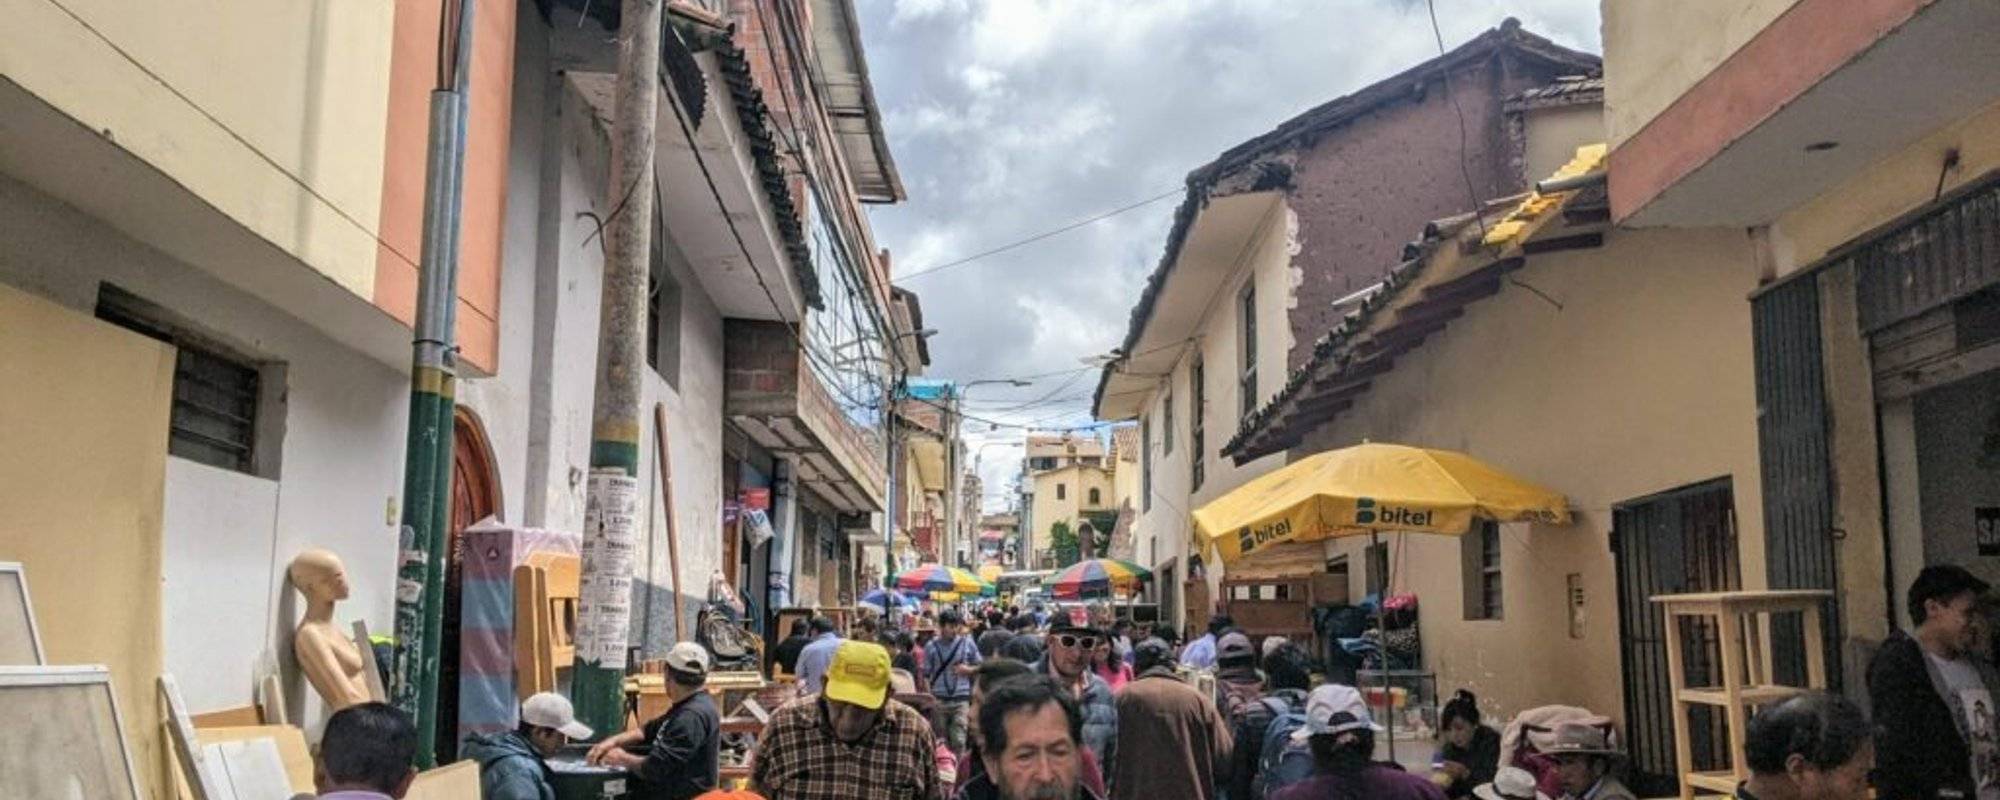 🇵🇪Hidden local market tourists don't know about in Cusco Peru! 